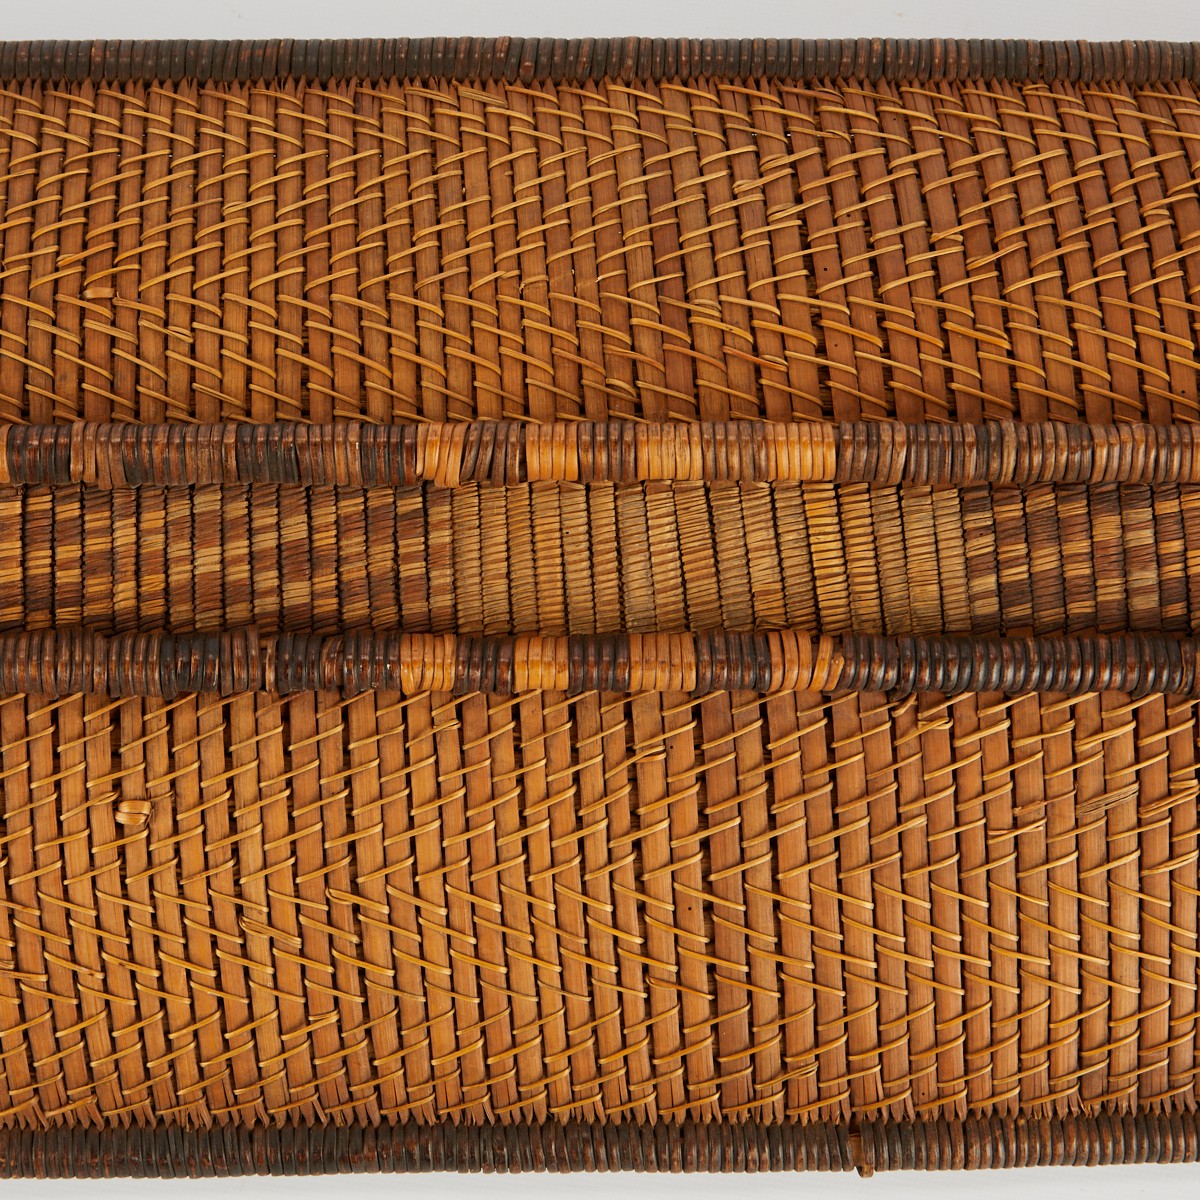 African Congo Woven Shield - Image 5 of 6